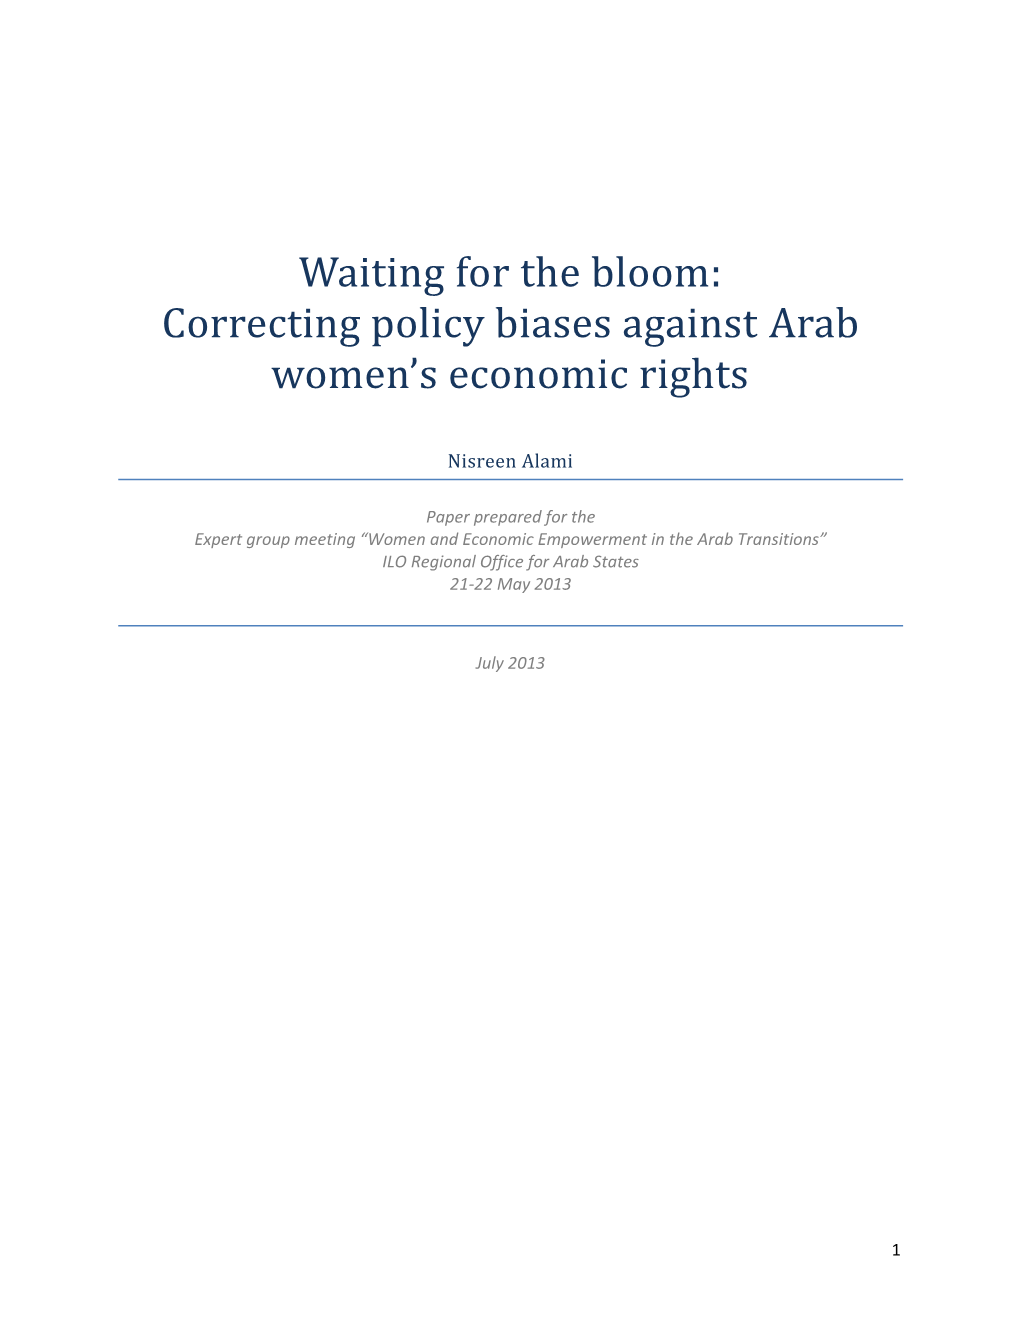 Waiting for the Bloom: Correcting Policy Biases Against Arab Women’S Economic Rights